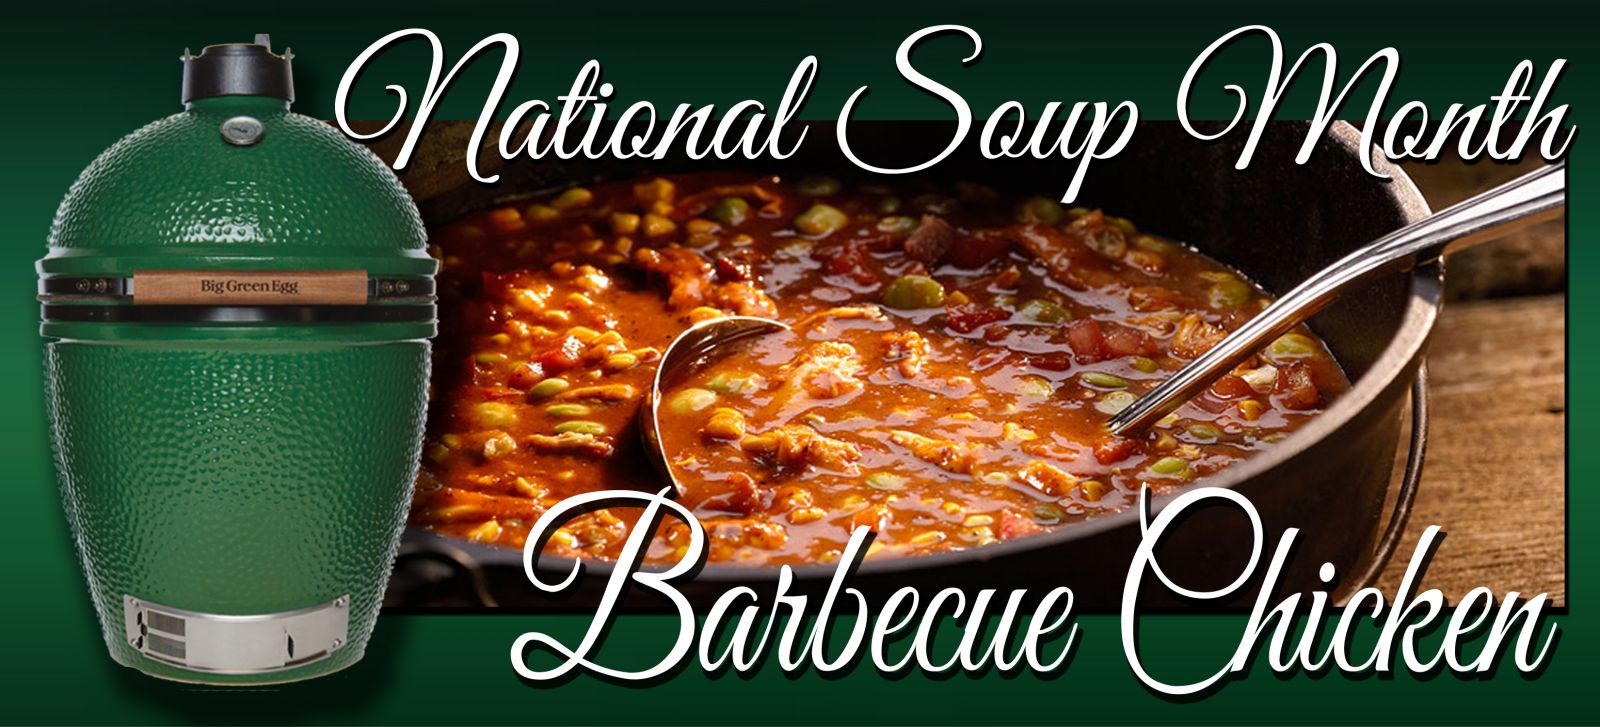 January is National Soup Month!